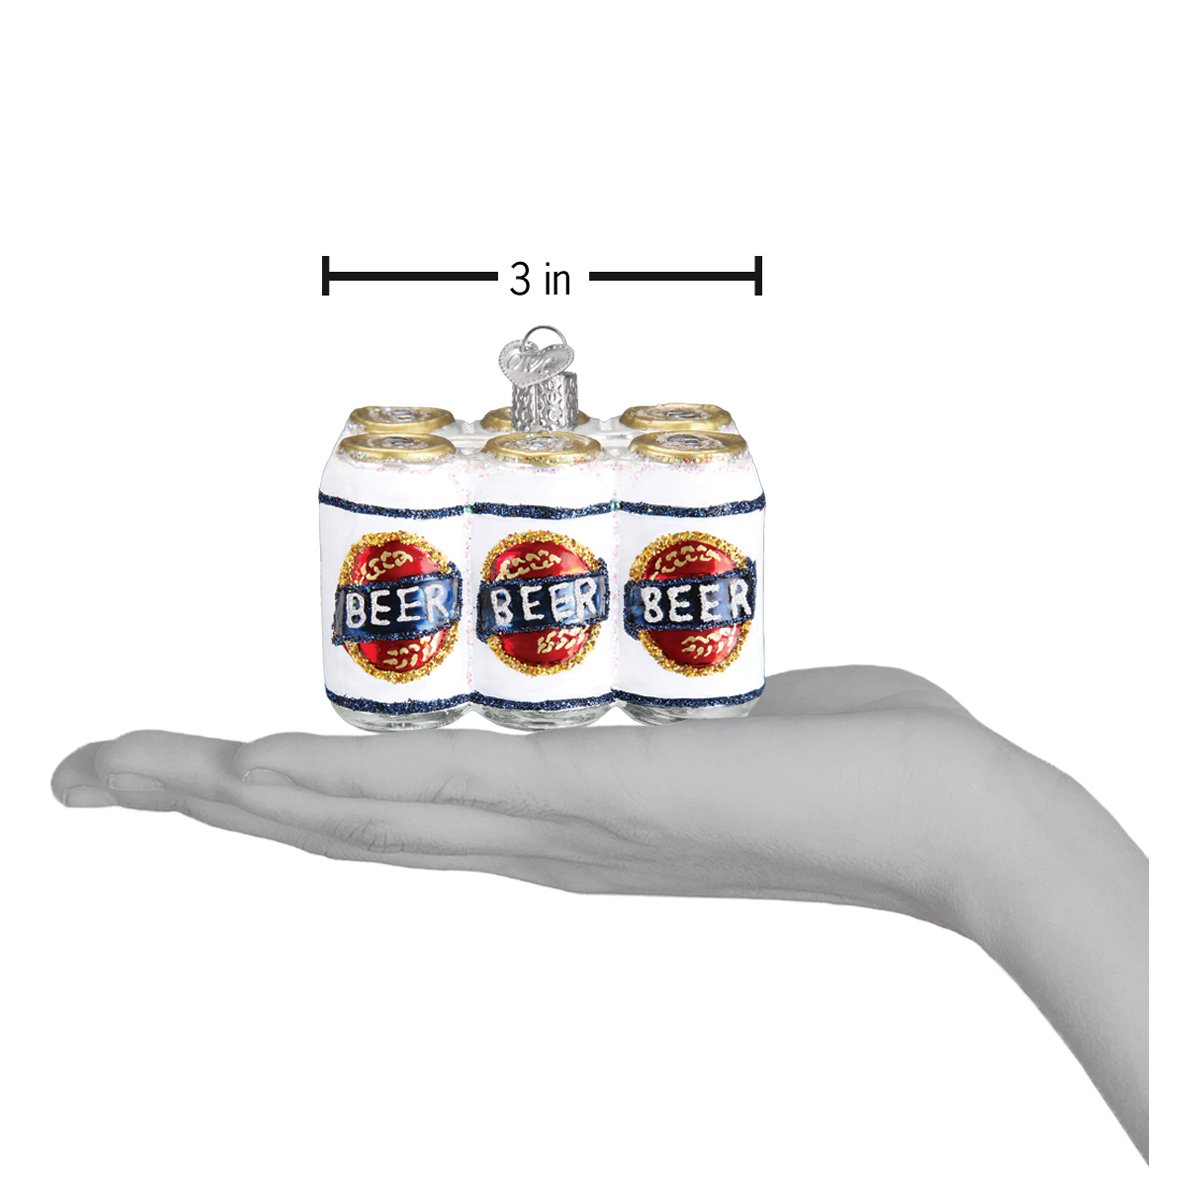 Six Pack Of Beer Ornament